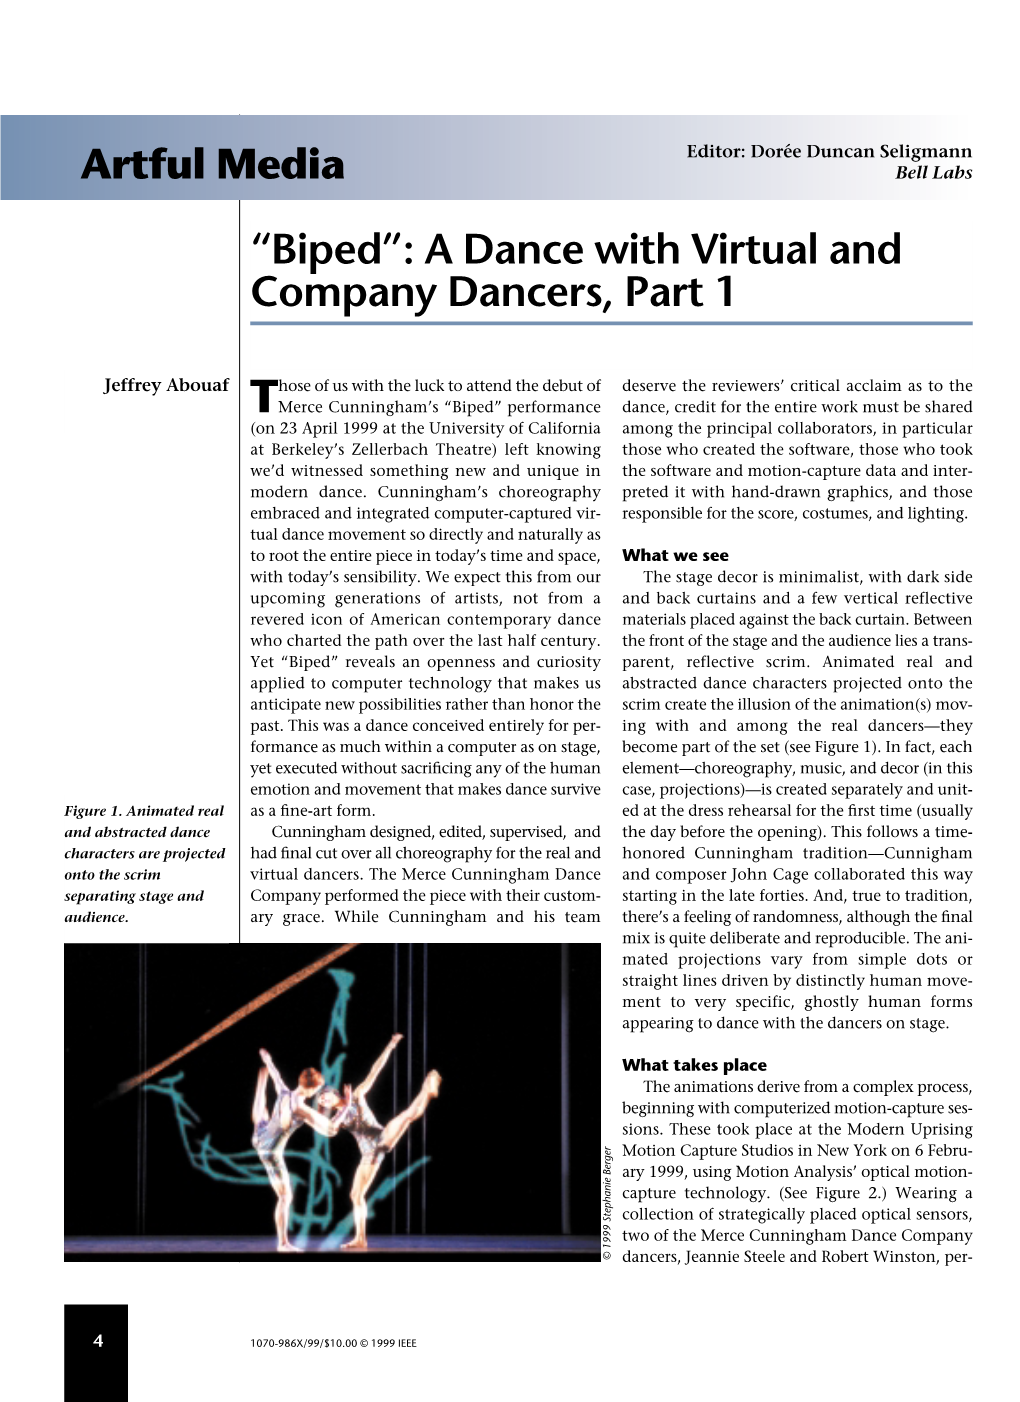 Biped”: a Dance with Virtual and Company Dancers, Part 1